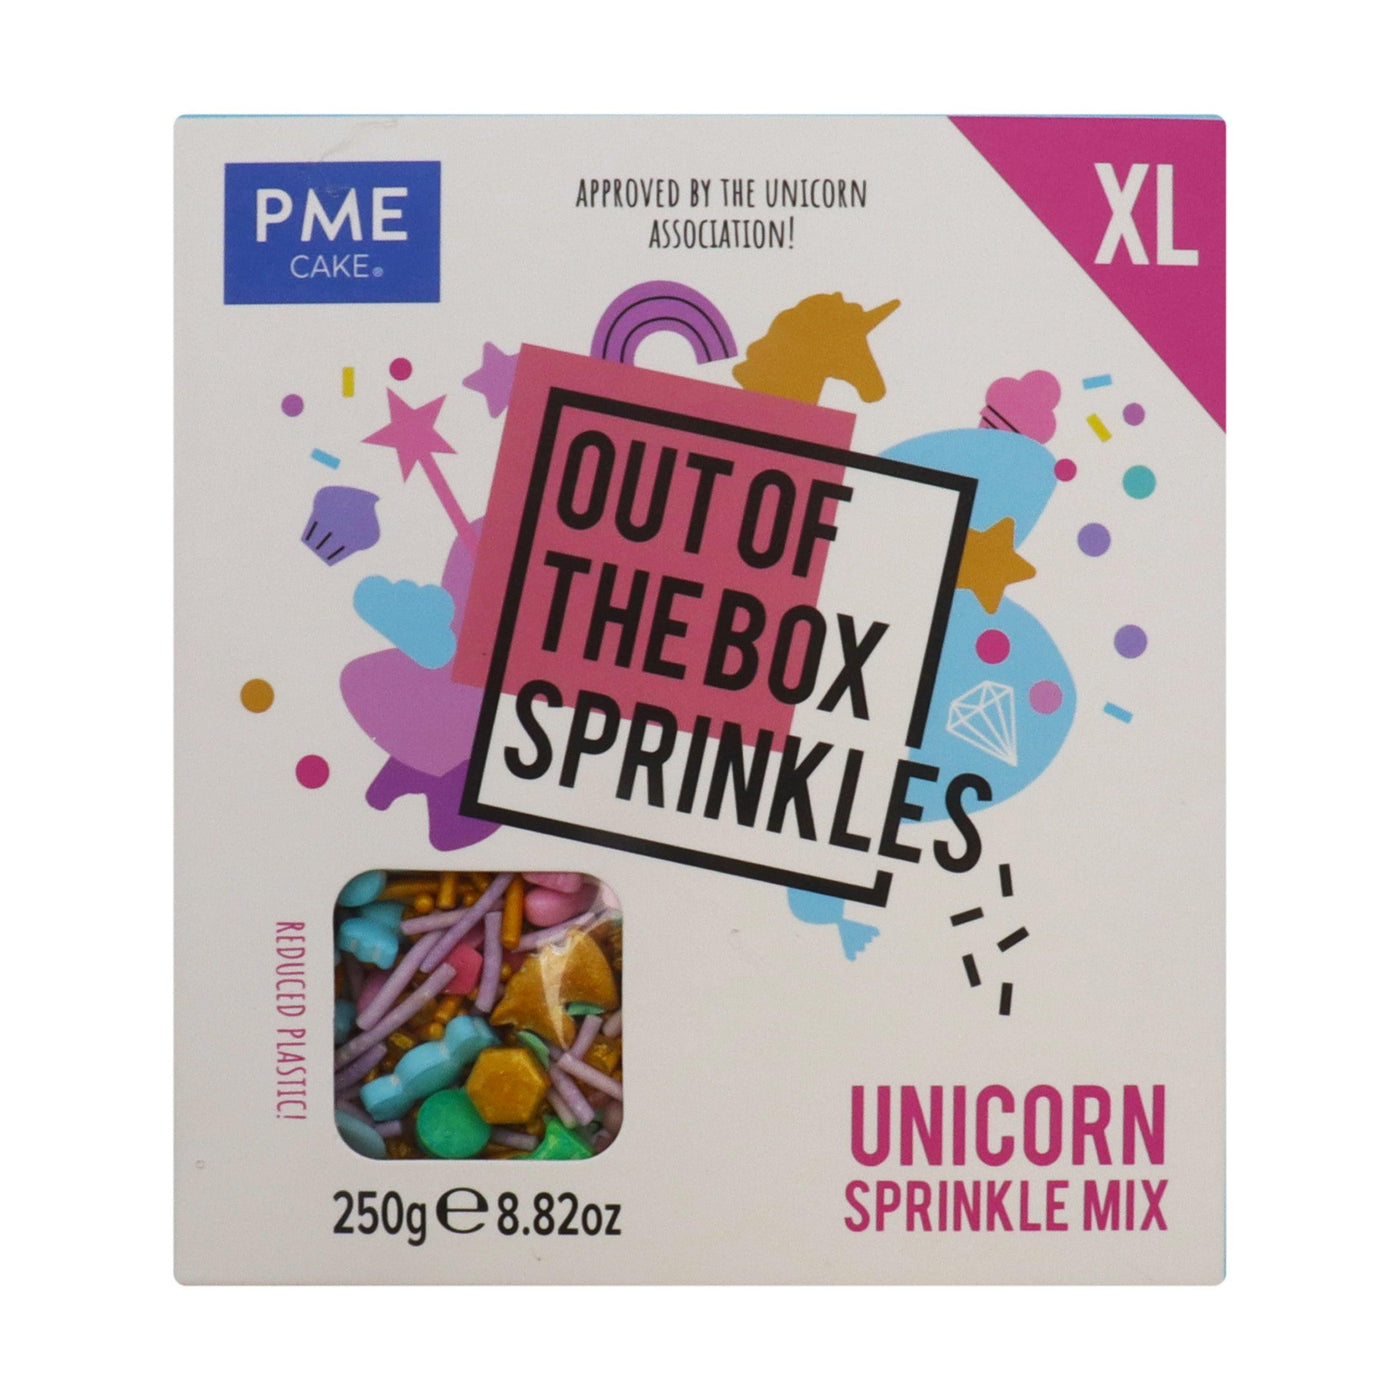 Out of the Box Sprinkles - Unicorn XL 250g - PME